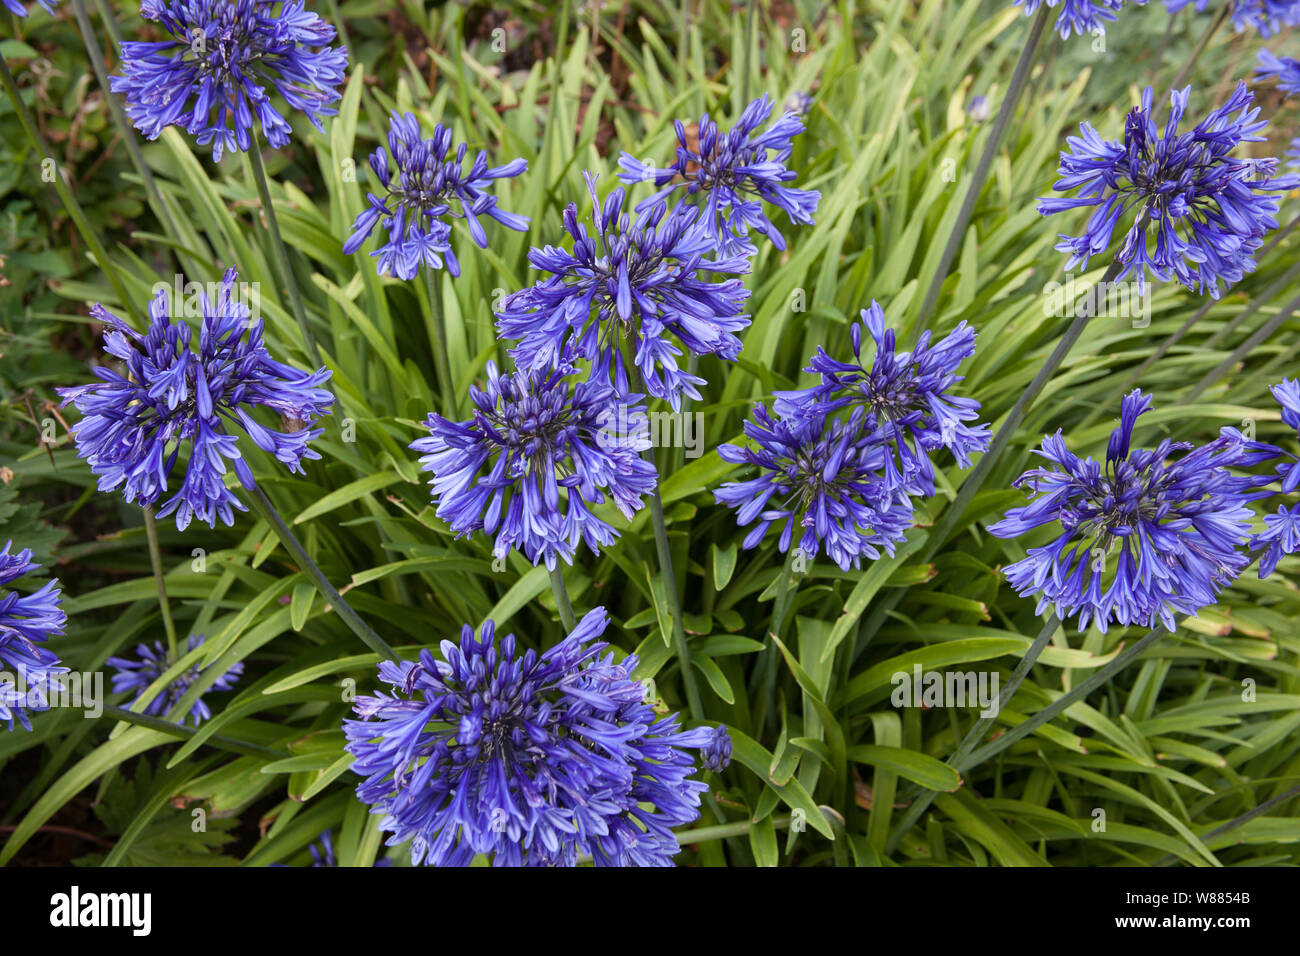 The purple blue flowers of the Agapanthus Orientalis plant Stock Photo